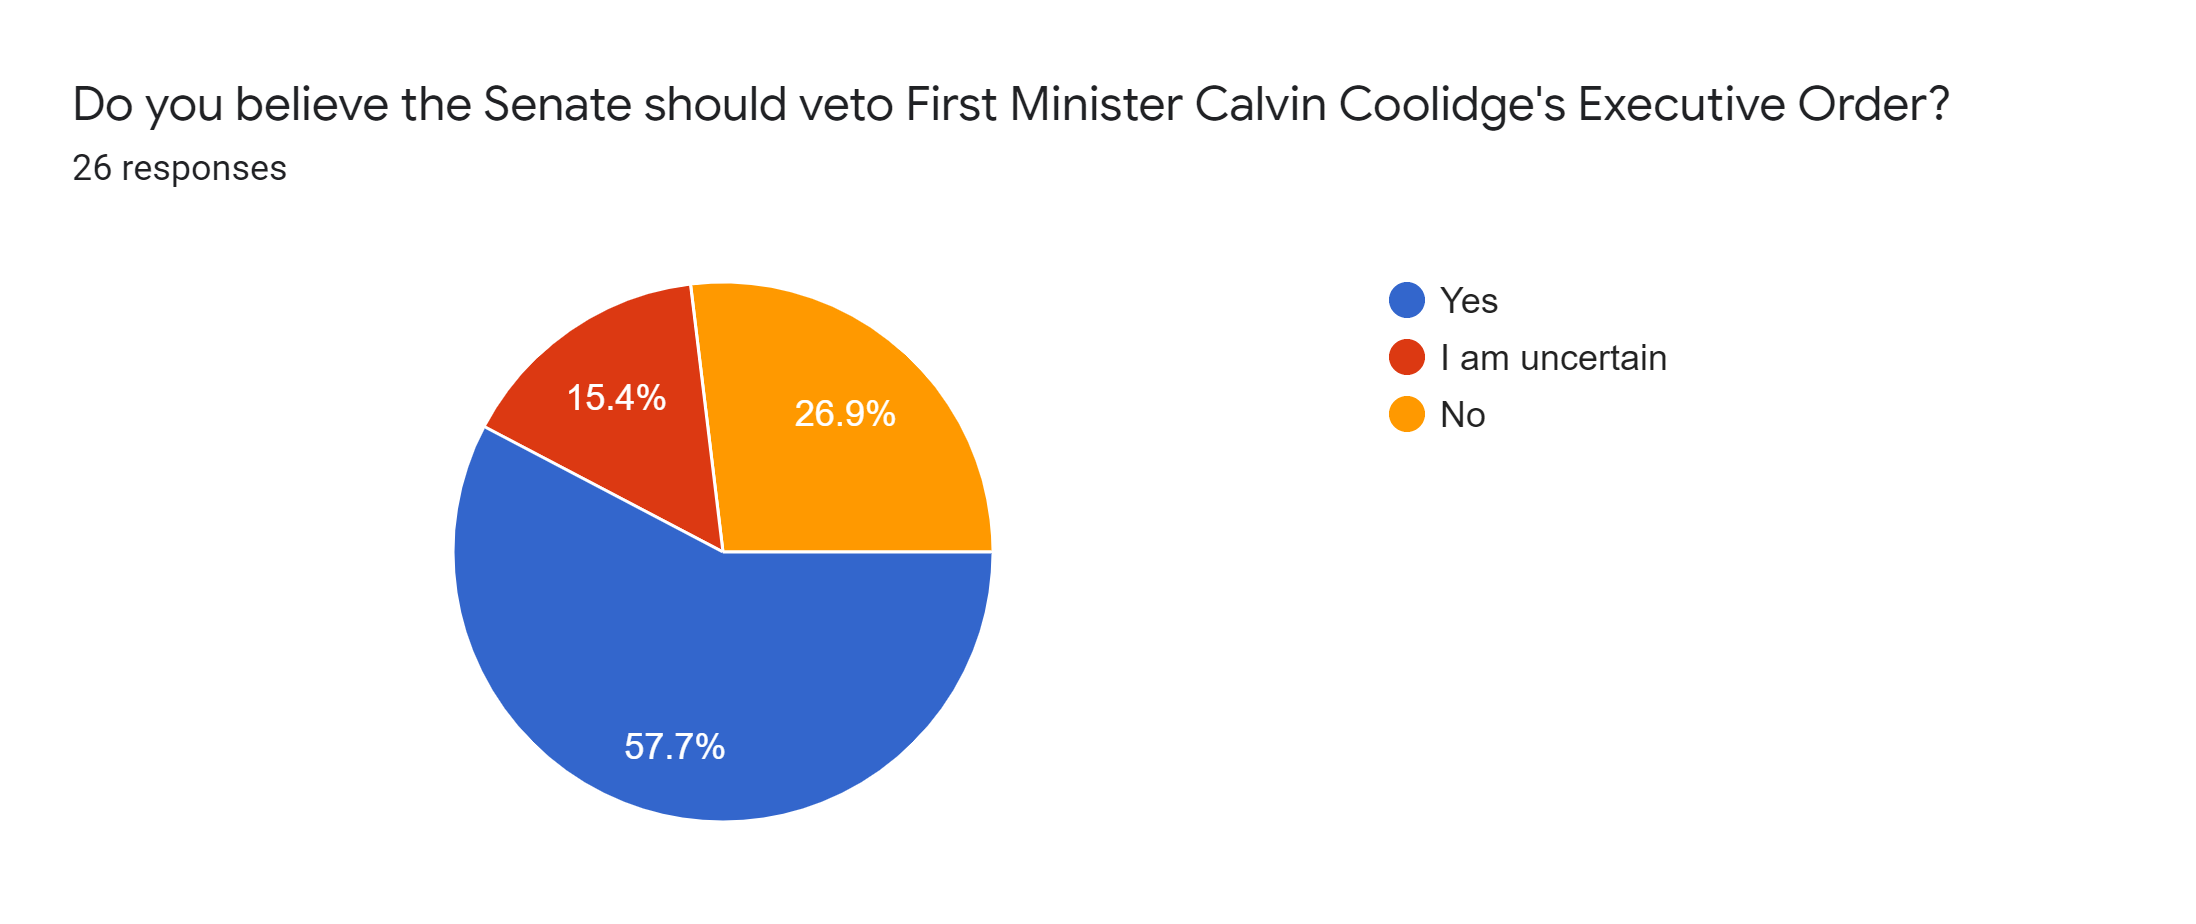 Forms response chart. Question title: Do you believe the Senate should veto First Minister Calvin Coolidge's Executive Order?. Number of responses: 26 responses.